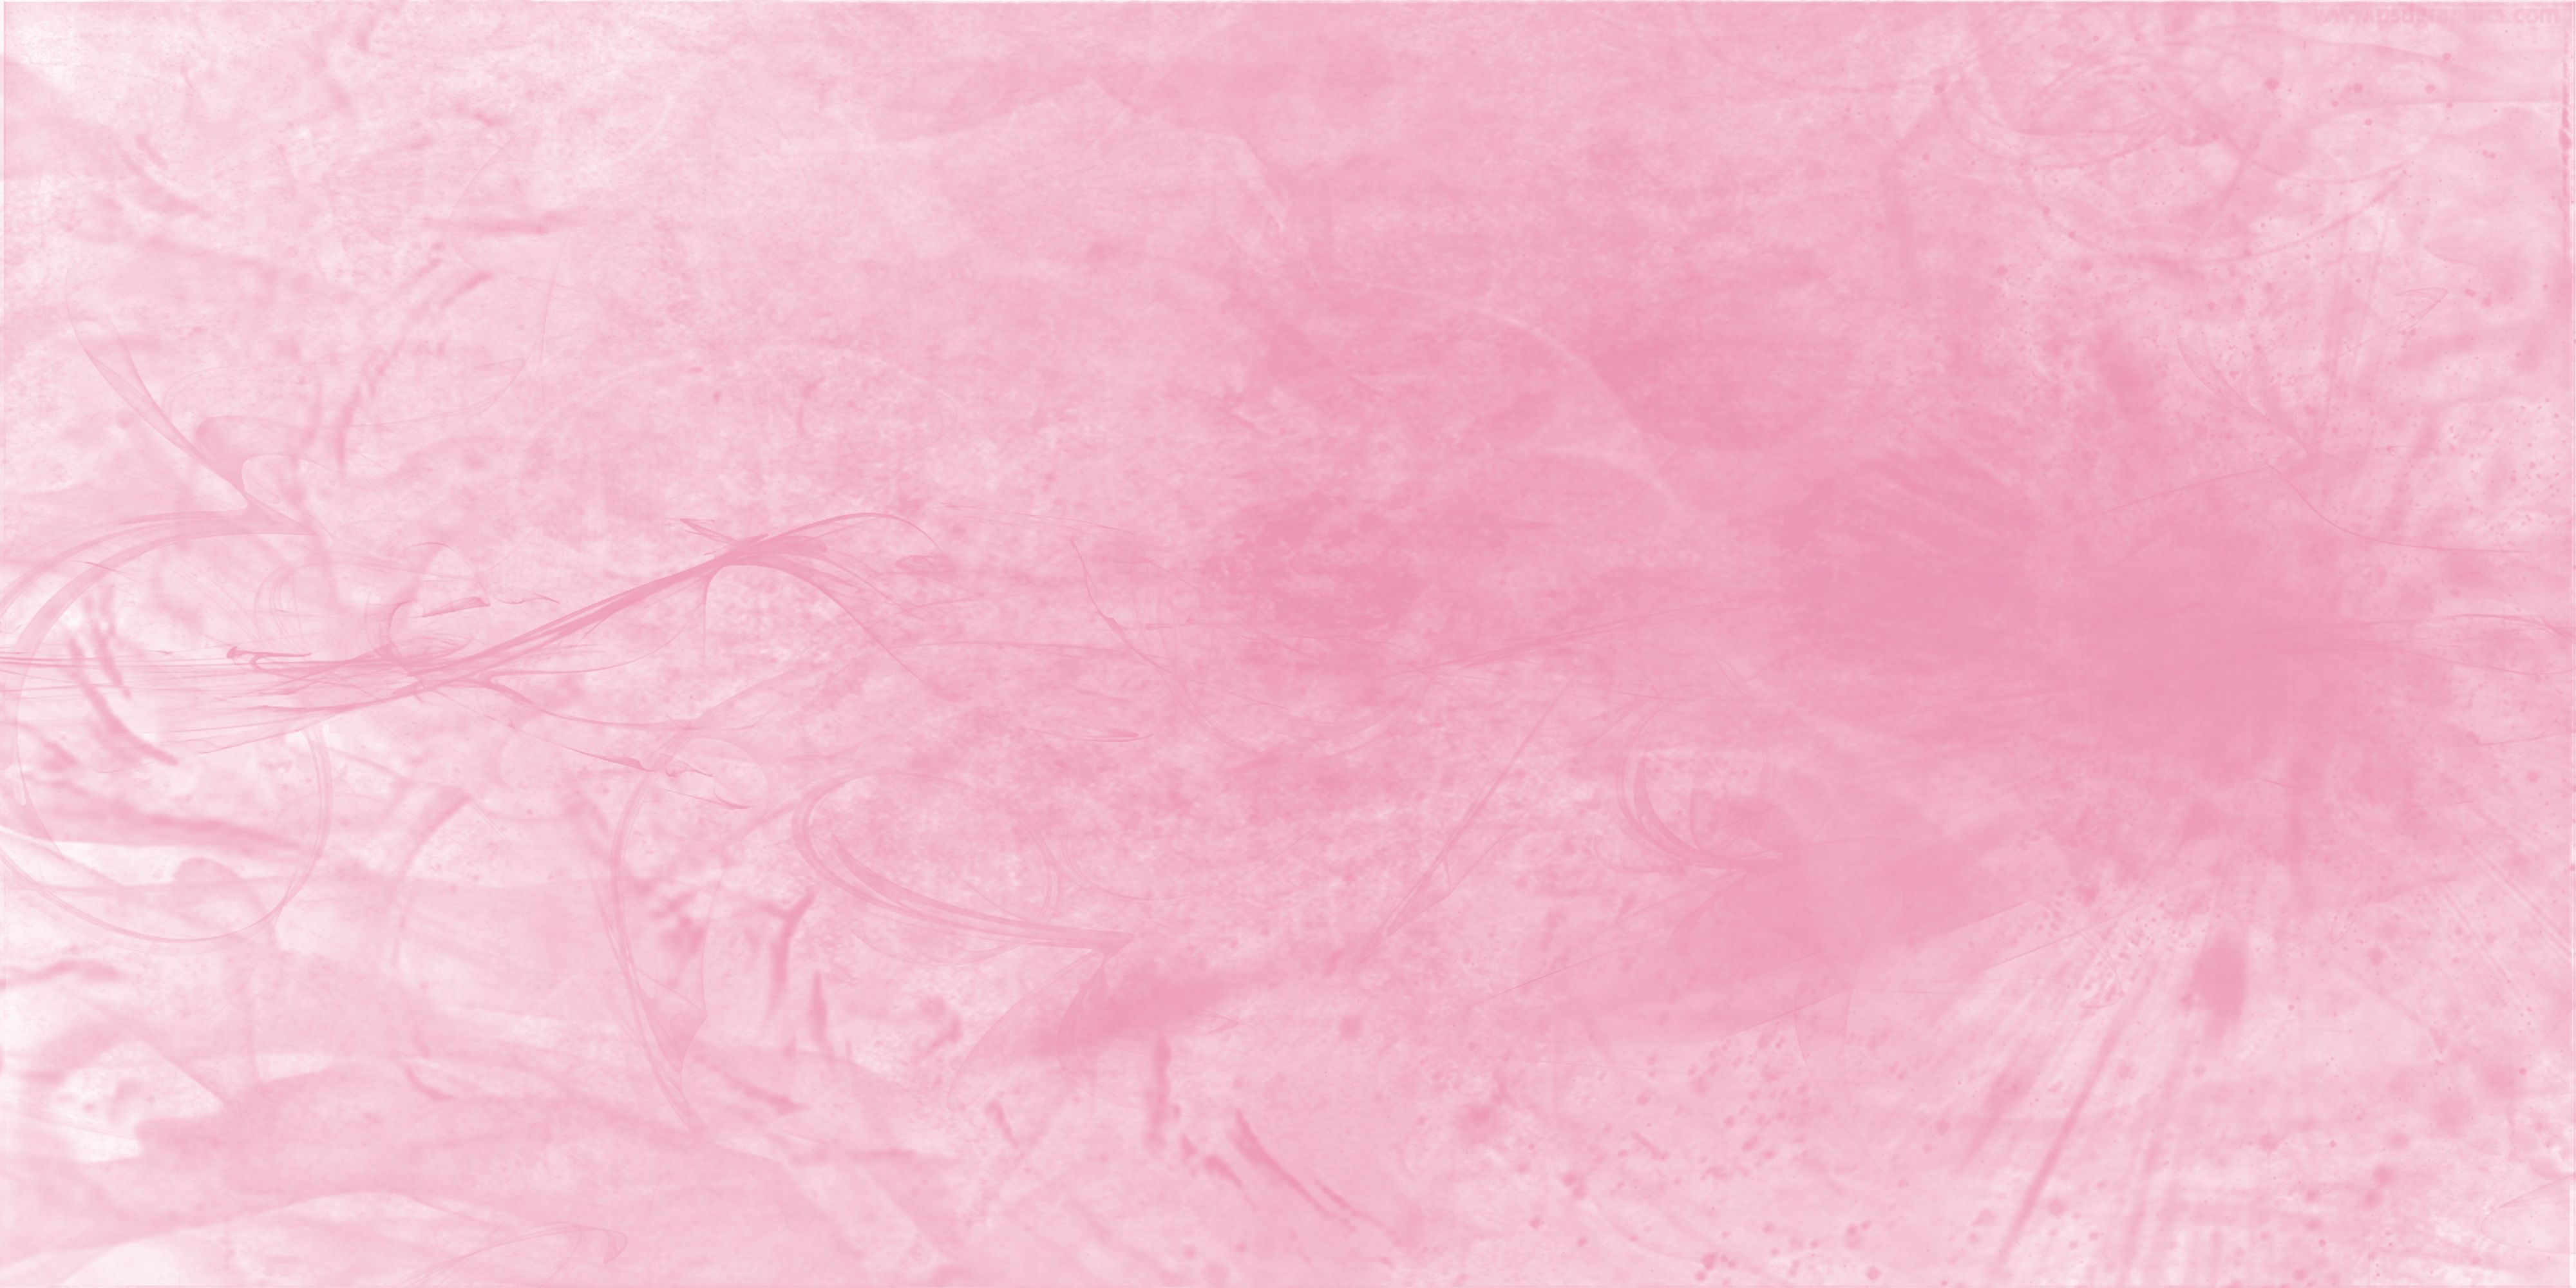 baby pink texture | Textures and Backgrounds for Photoshop | Pinterest